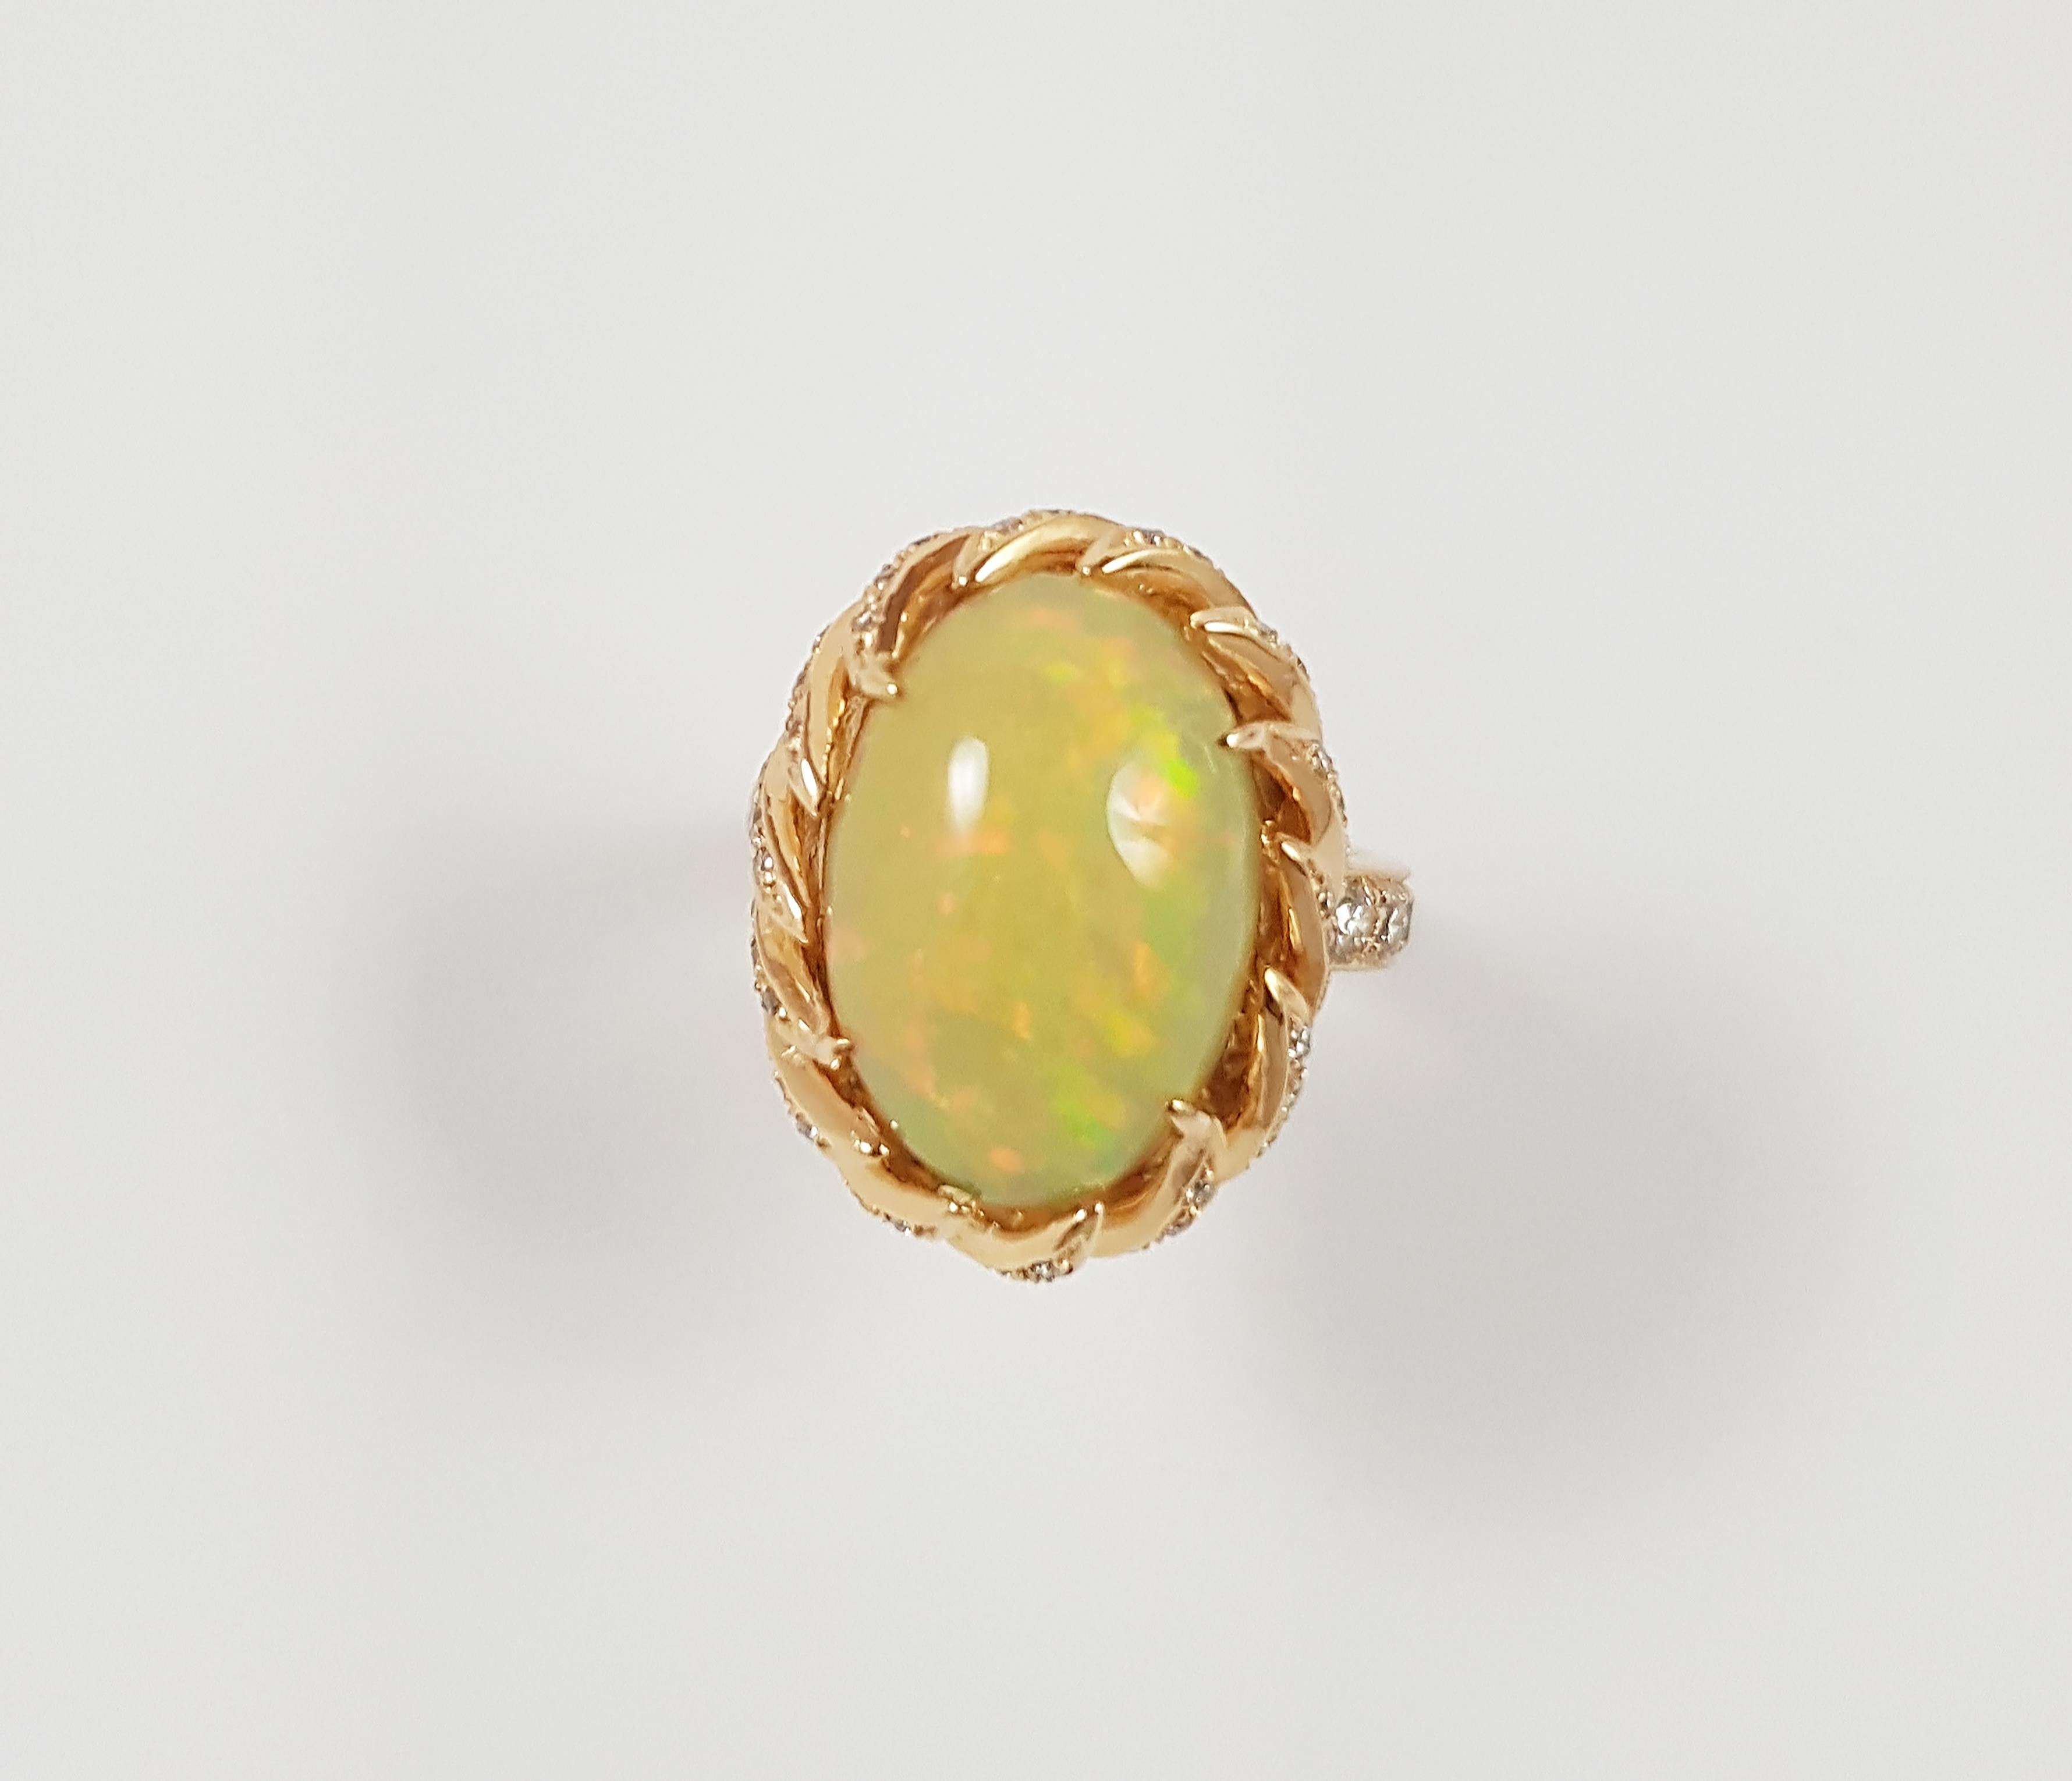 Opal 6.12 carats with Brown Diamond 0.87 carats Ring set in 18 Karat Rose Gold Settings

Width: 1.9 cm
Length: 1.6 cm 
Ring Size: 51

